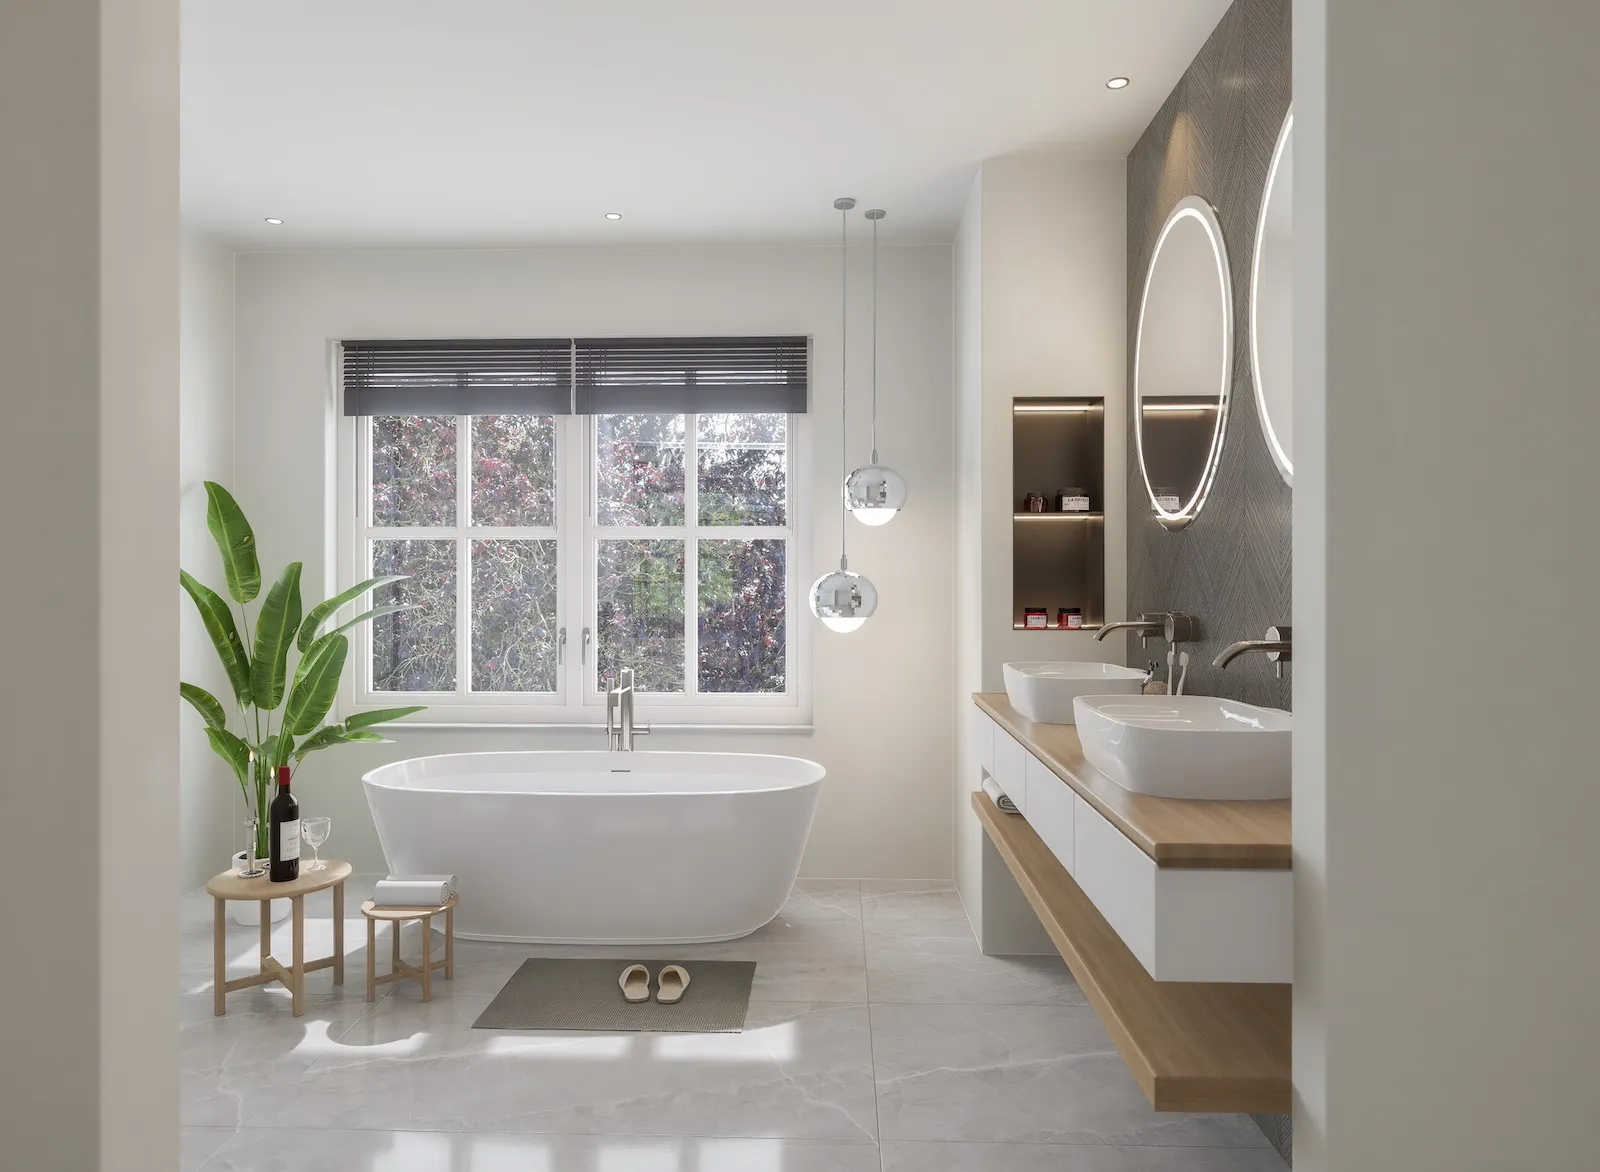 Average bathroom size: standard size and dimensions for every type of bathroom